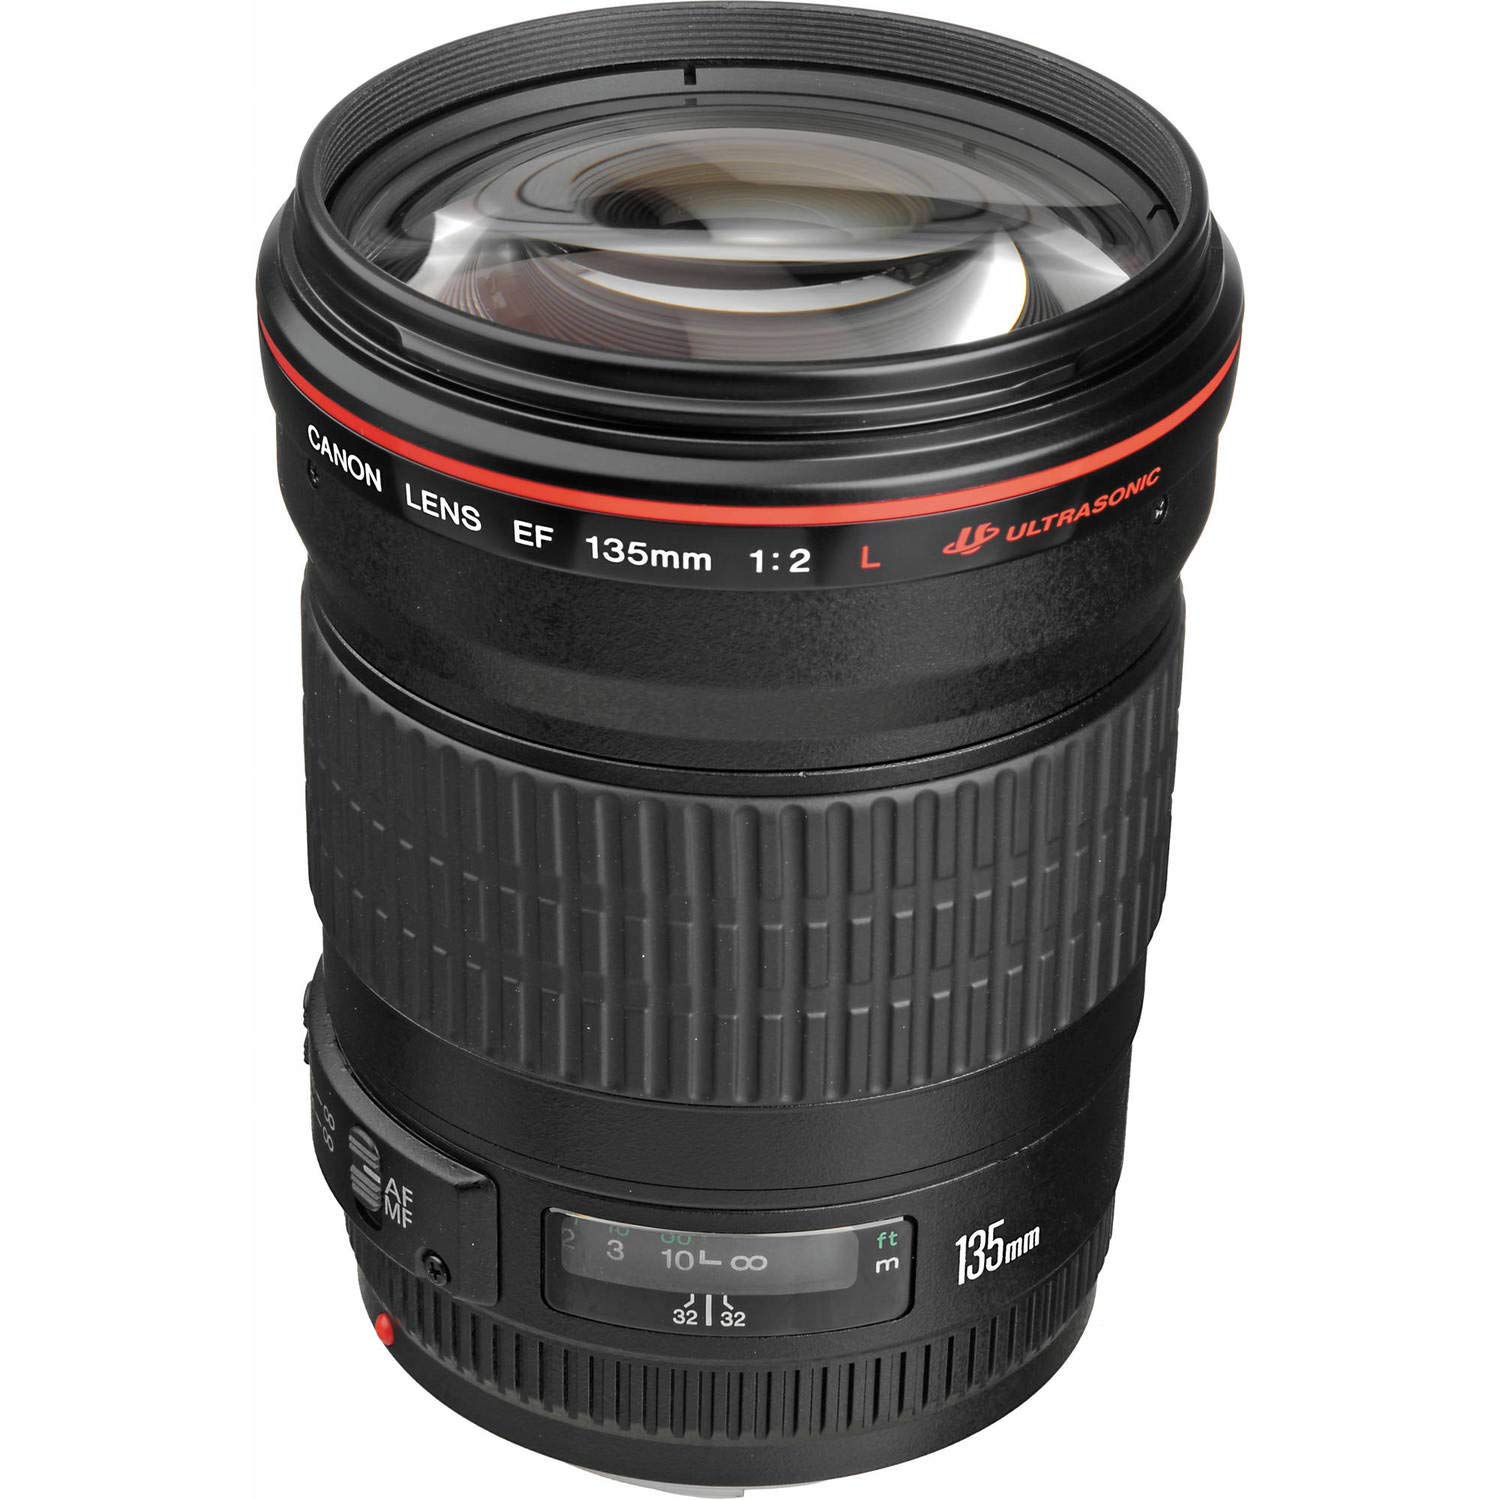 Canon EF 135mm f/2L USM Lens (Intl Model) with Filter Kit, Lens Case, Tripod and Cleaning Kit